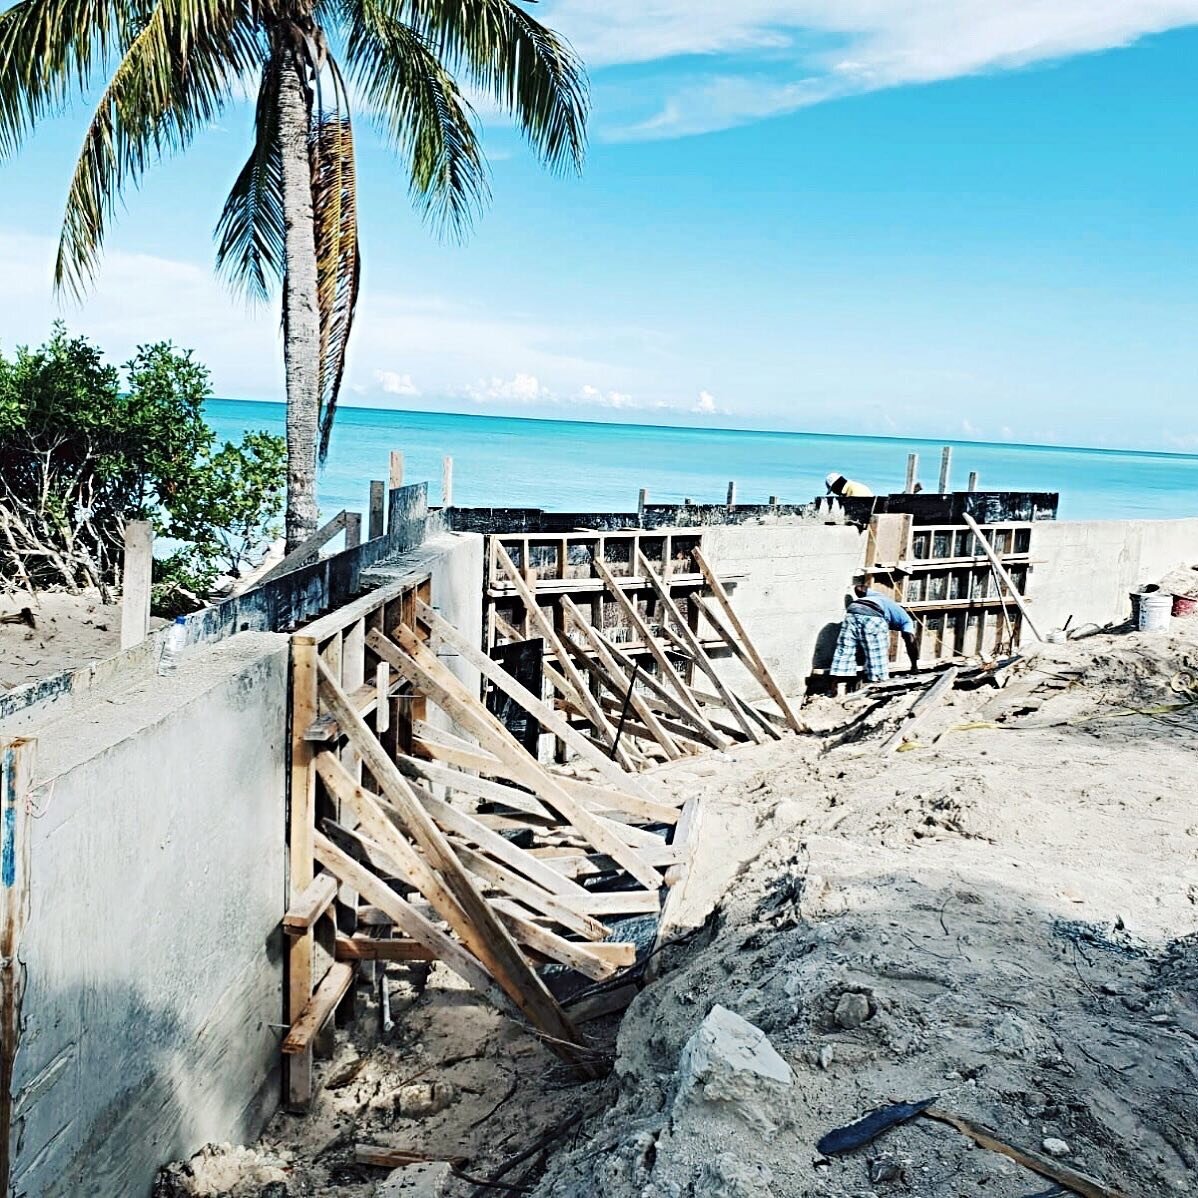 Sea wall progressing out in Parrot Cay...
.
.
.
.
.
#islandconstruction  #villaconstruction  #constructionlife #olympicconstructionltd  #parrotcay  #turksandcaicos  #beautifulbynature